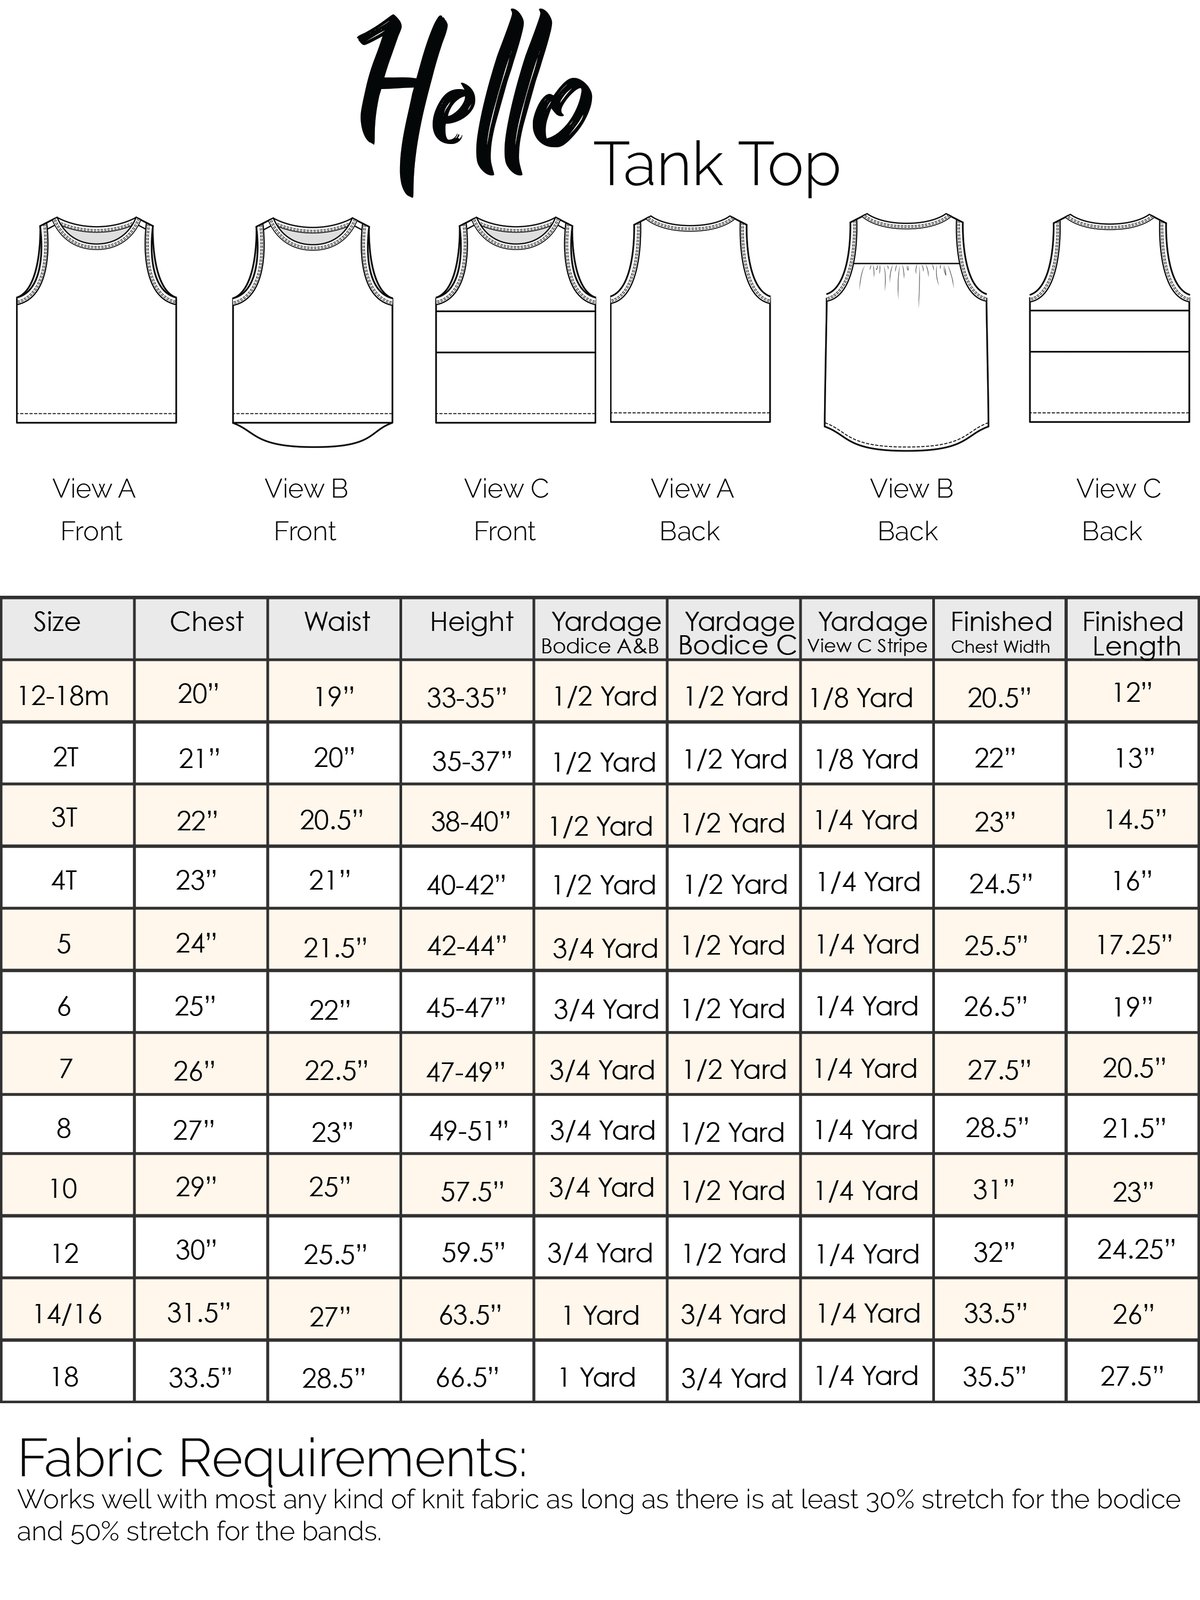 Knit Works Size Chart